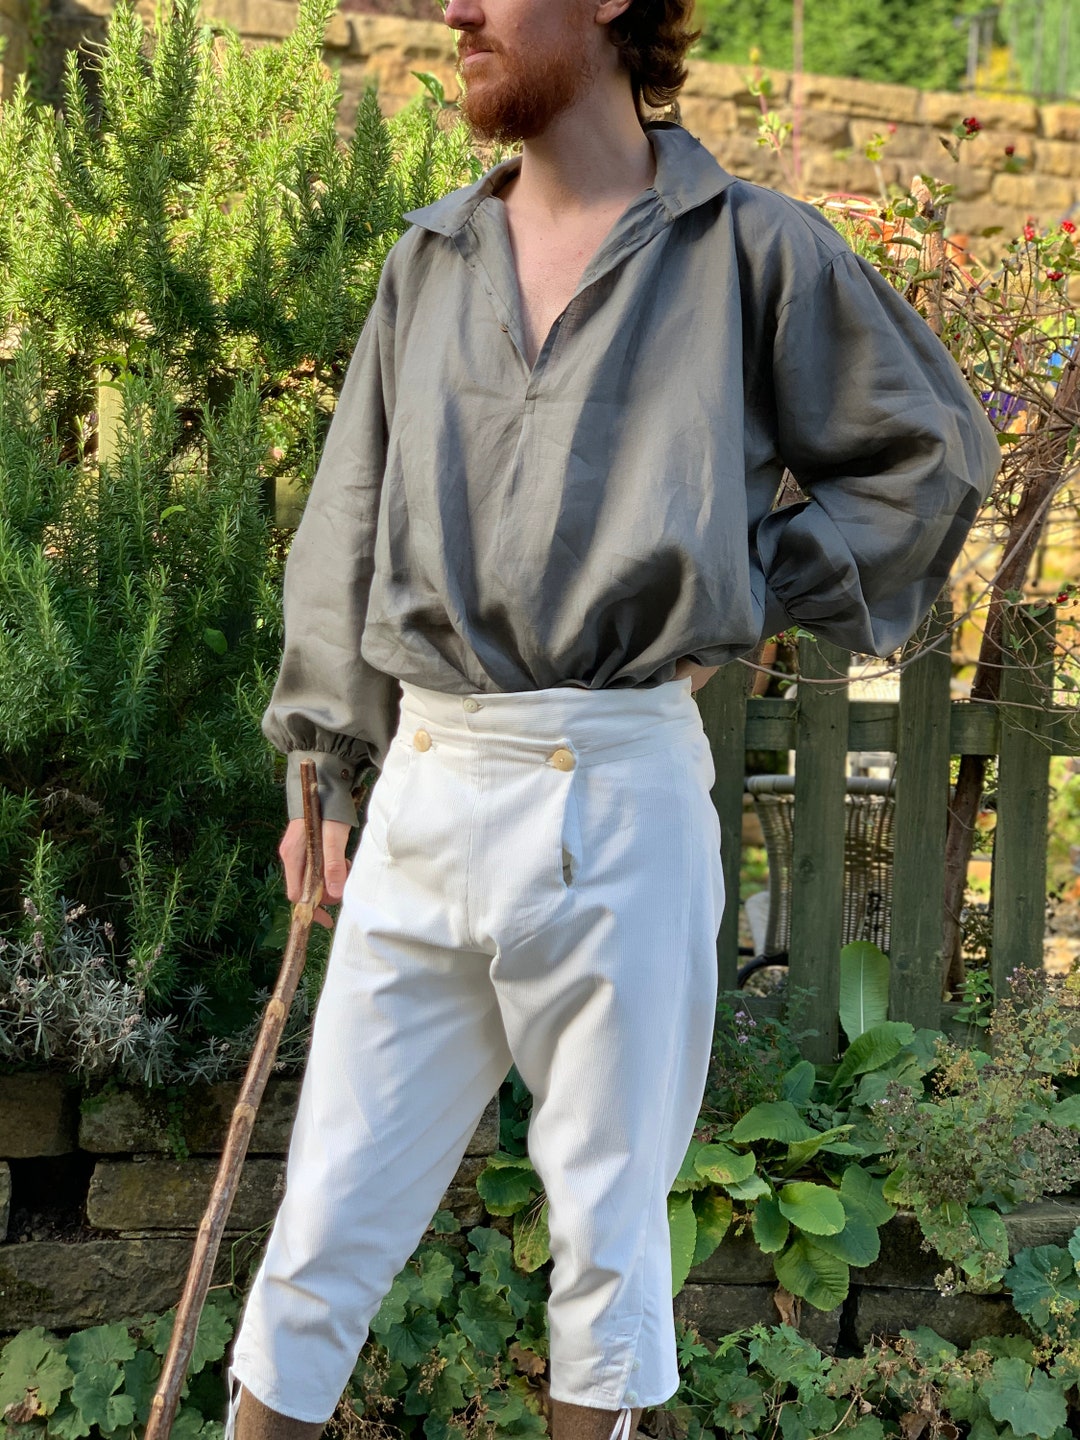 Men's Breeches in Undyed Cotton Corduroy, Fall-front Style - Etsy